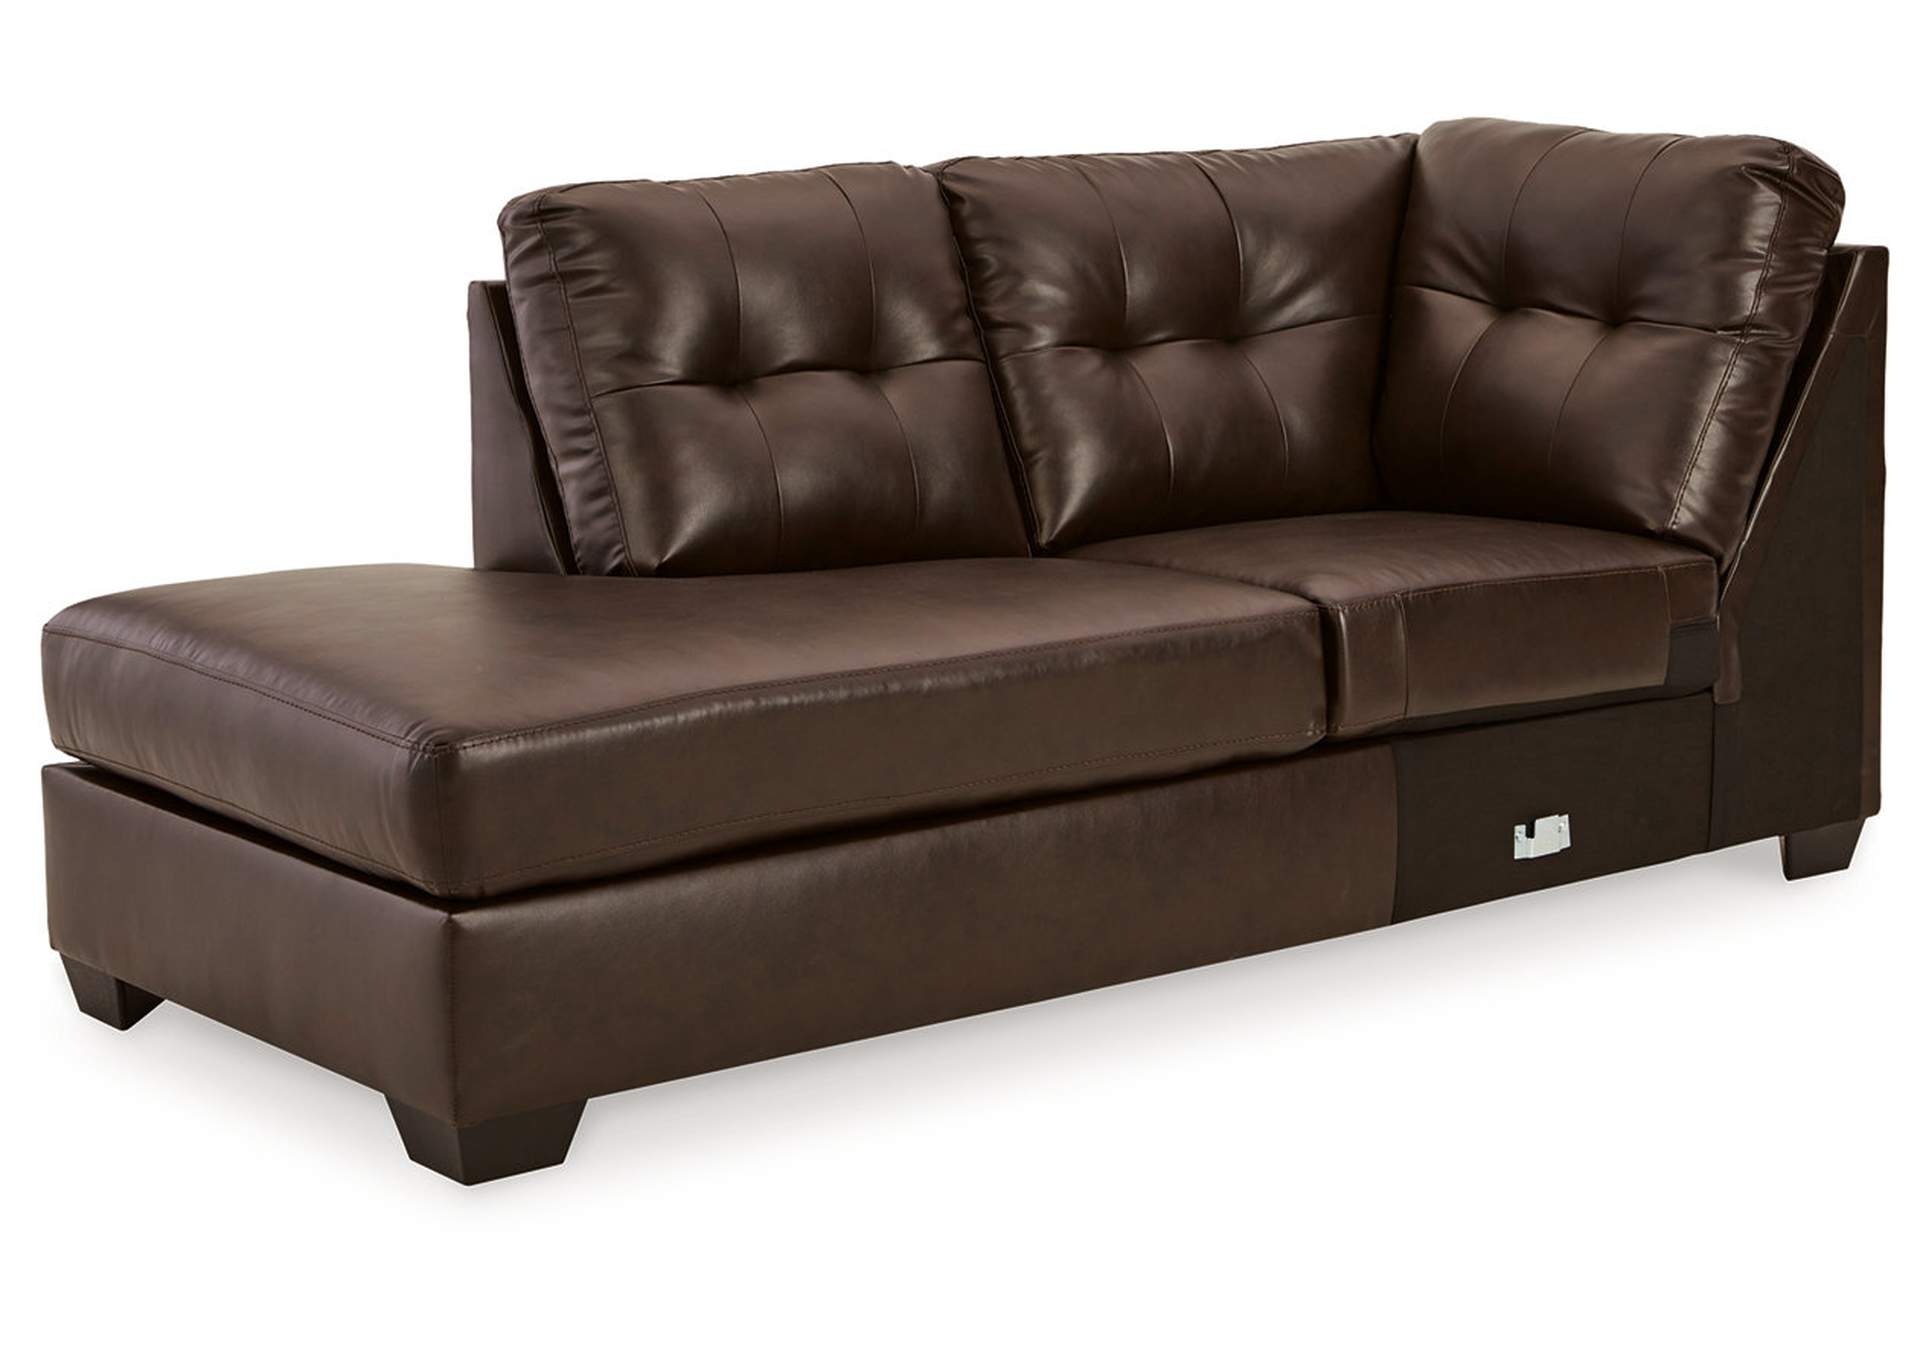 Donlen 2-Piece Sectional with Ottoman,Signature Design By Ashley